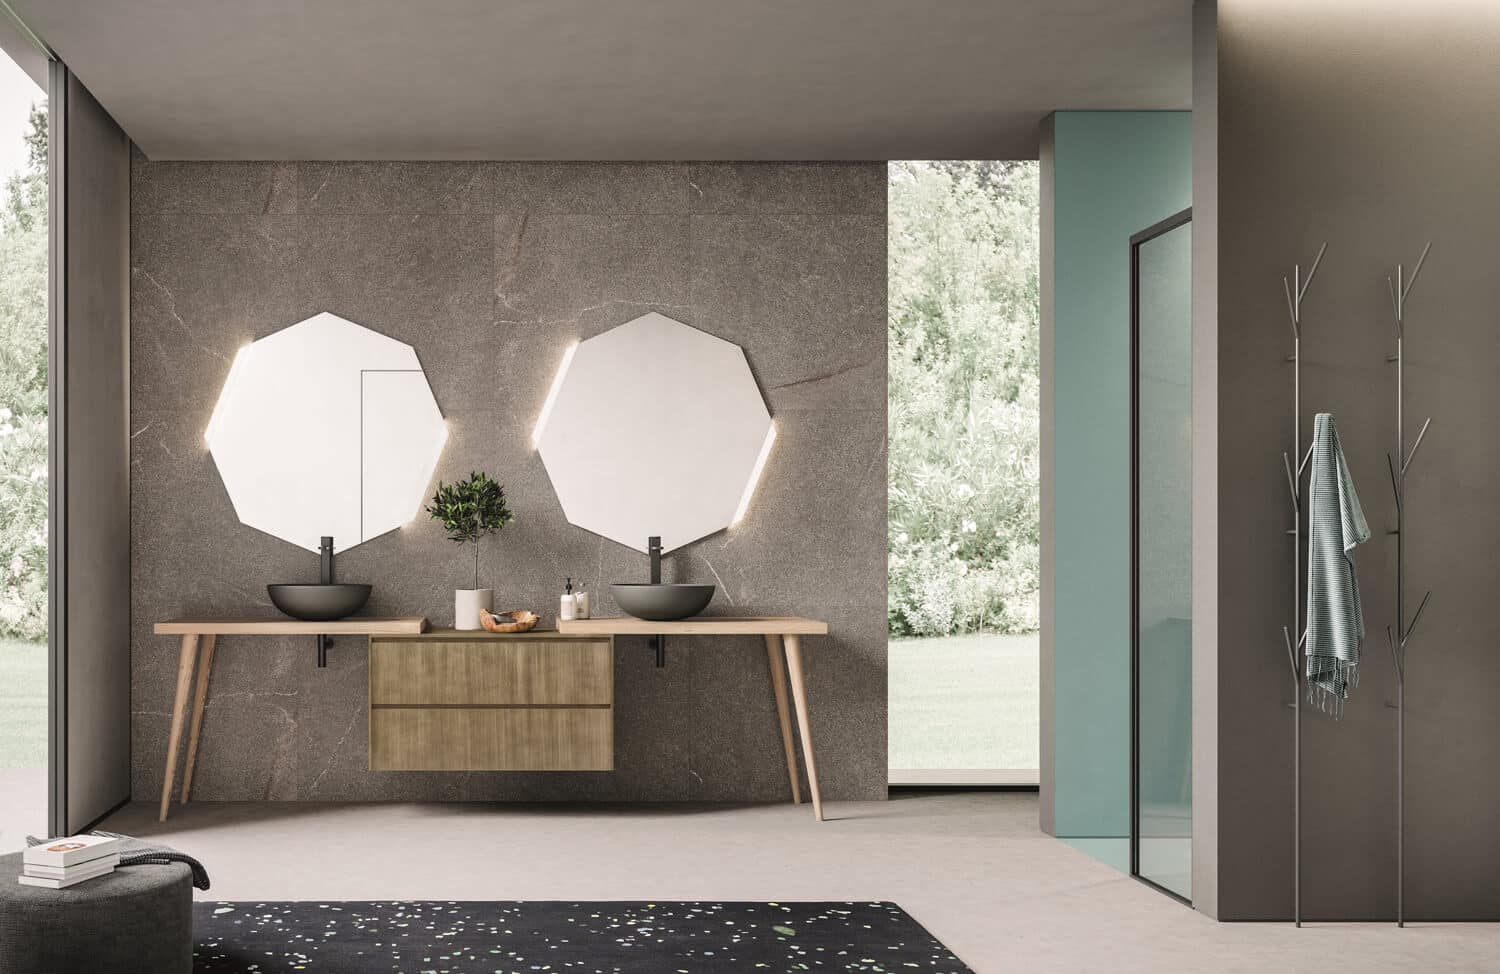 With Calix, playing with shapes is part of the design. Ottone metal cabinet with tops and legs in turned knotted Rovere Naturale. Round washbasins in ceramic and backlit octagonal mirrors.